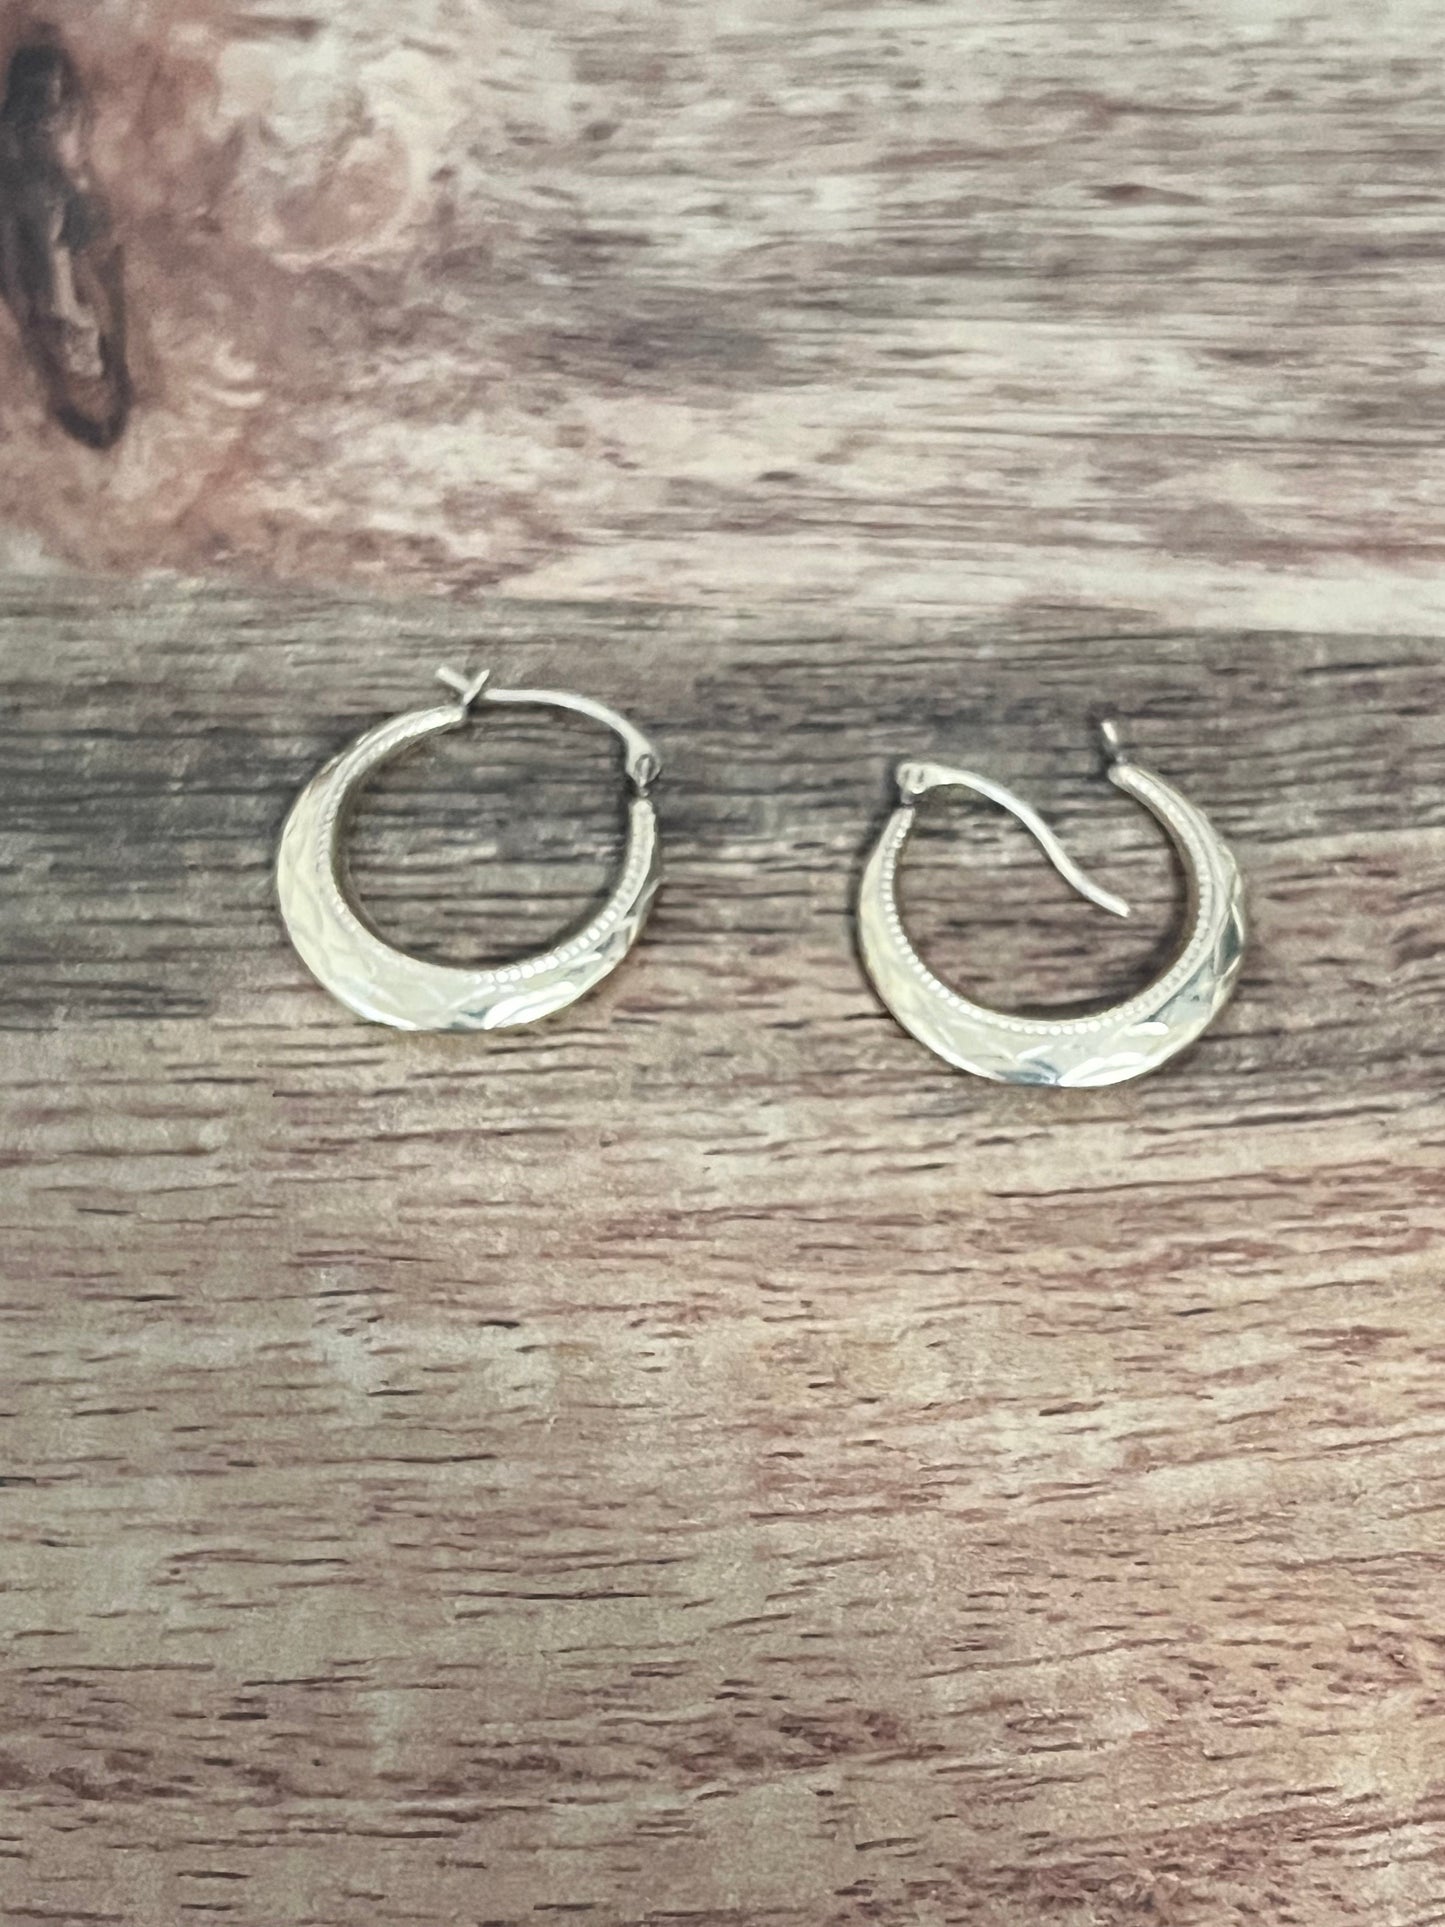 THE OFFICE: Pam Beesly's Small Gold Hoop Earrings